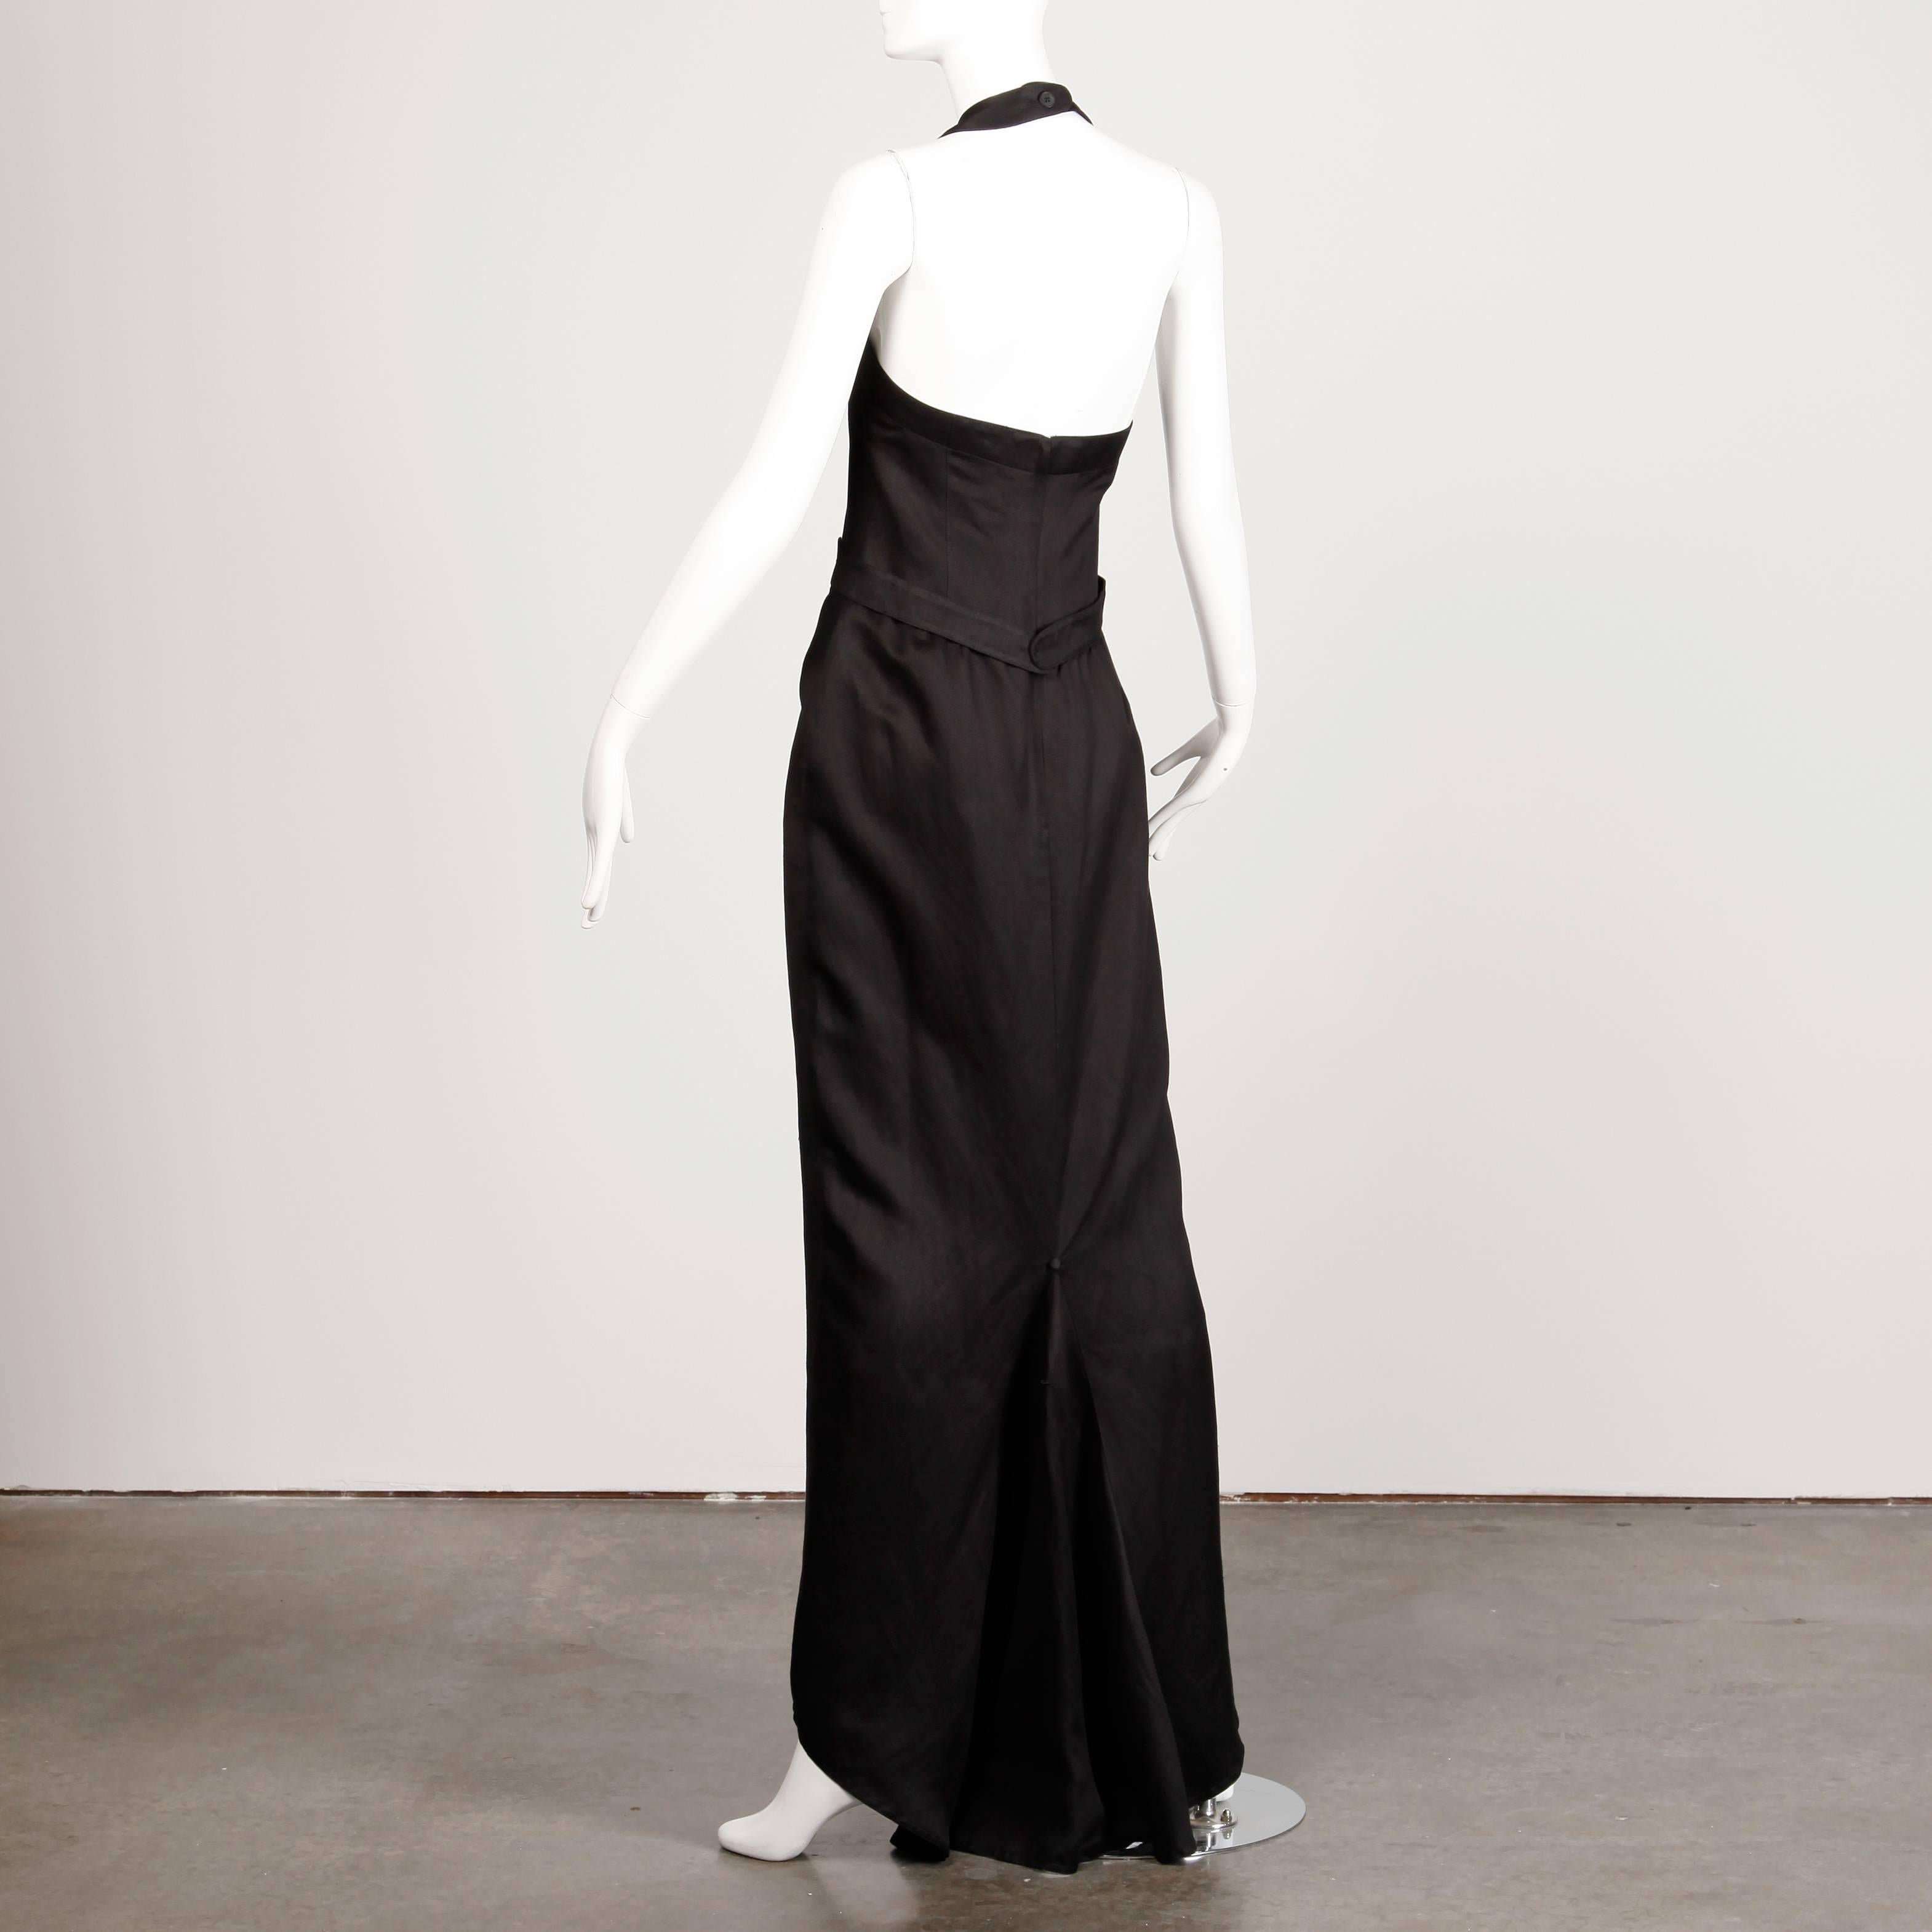 Fendi 365 for Neiman Marcus Vintage 1970s Black Evening Gown with Back Train In Excellent Condition For Sale In Sparks, NV